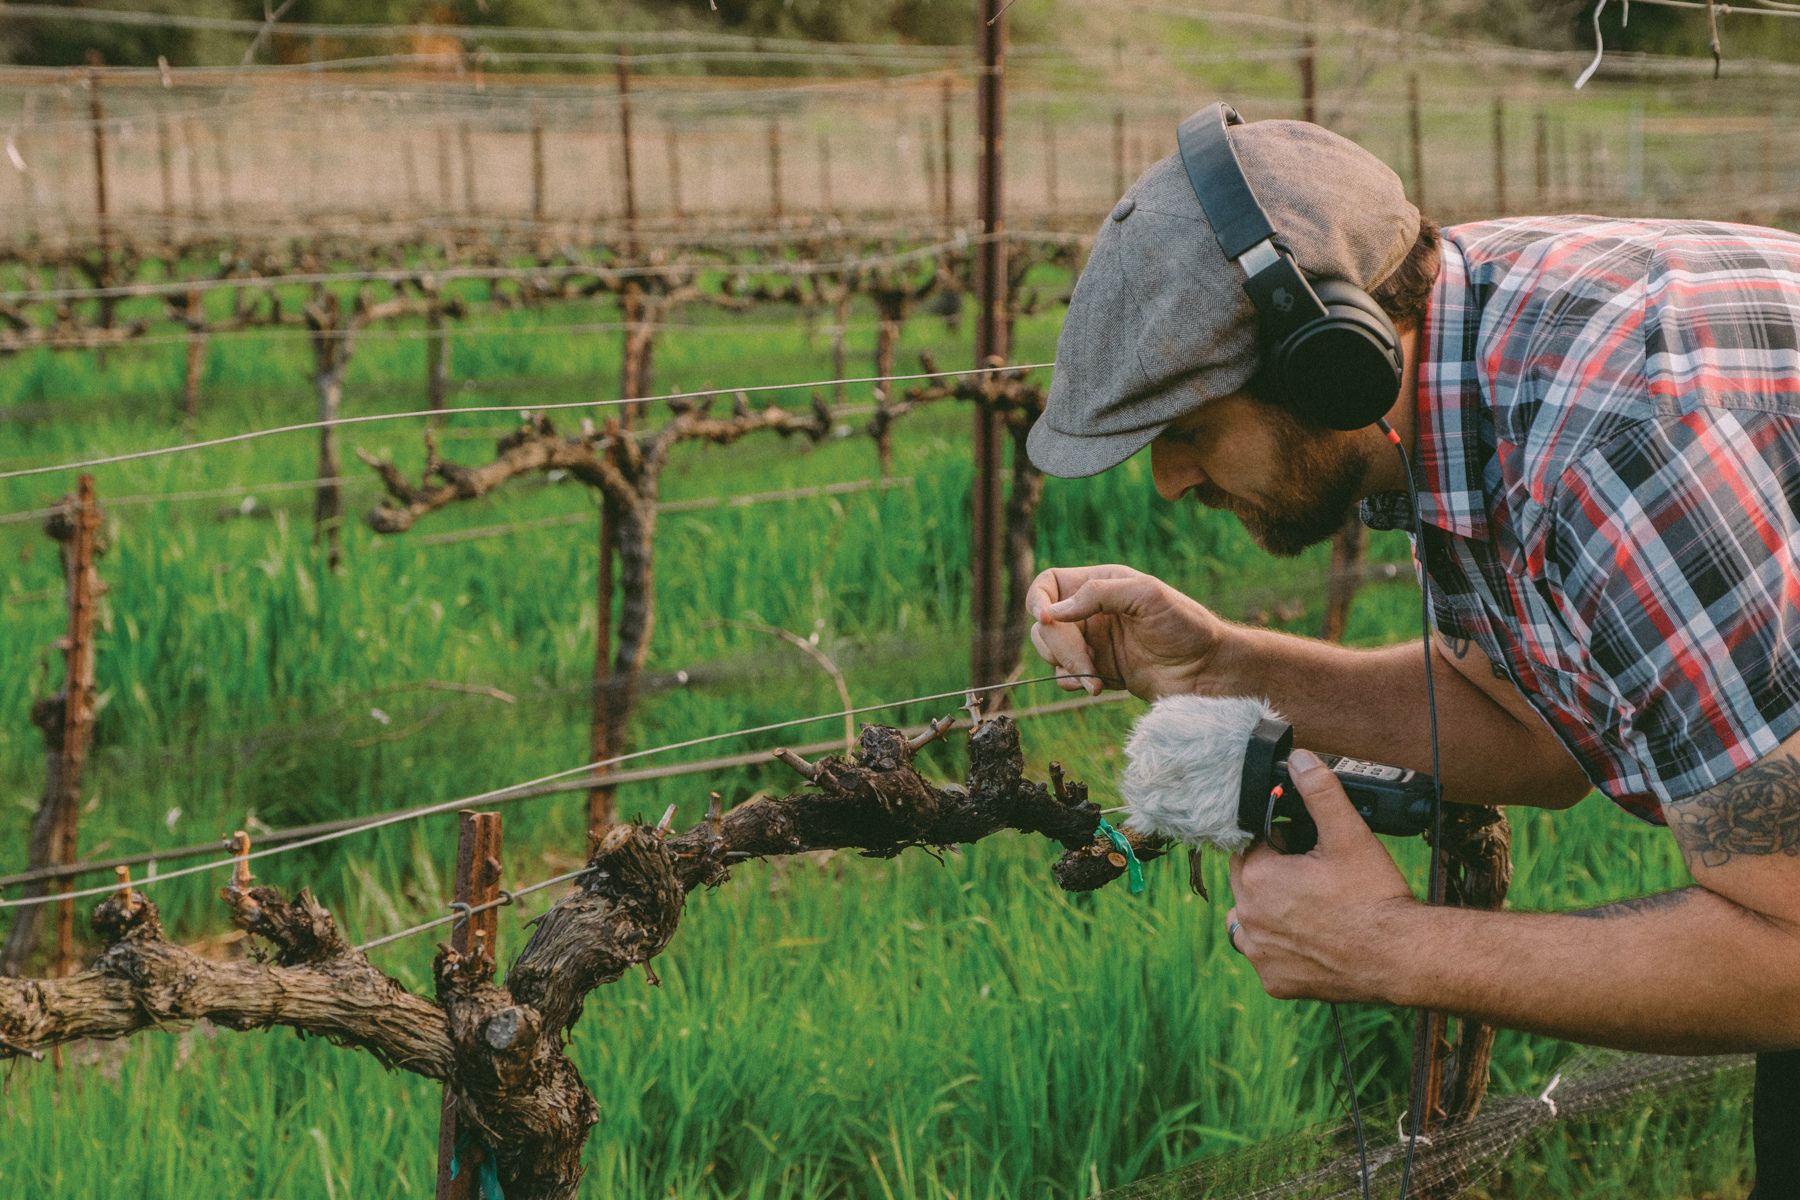 Brook captures the natural sounds of the vines and vineyard as he hears them from day to day.